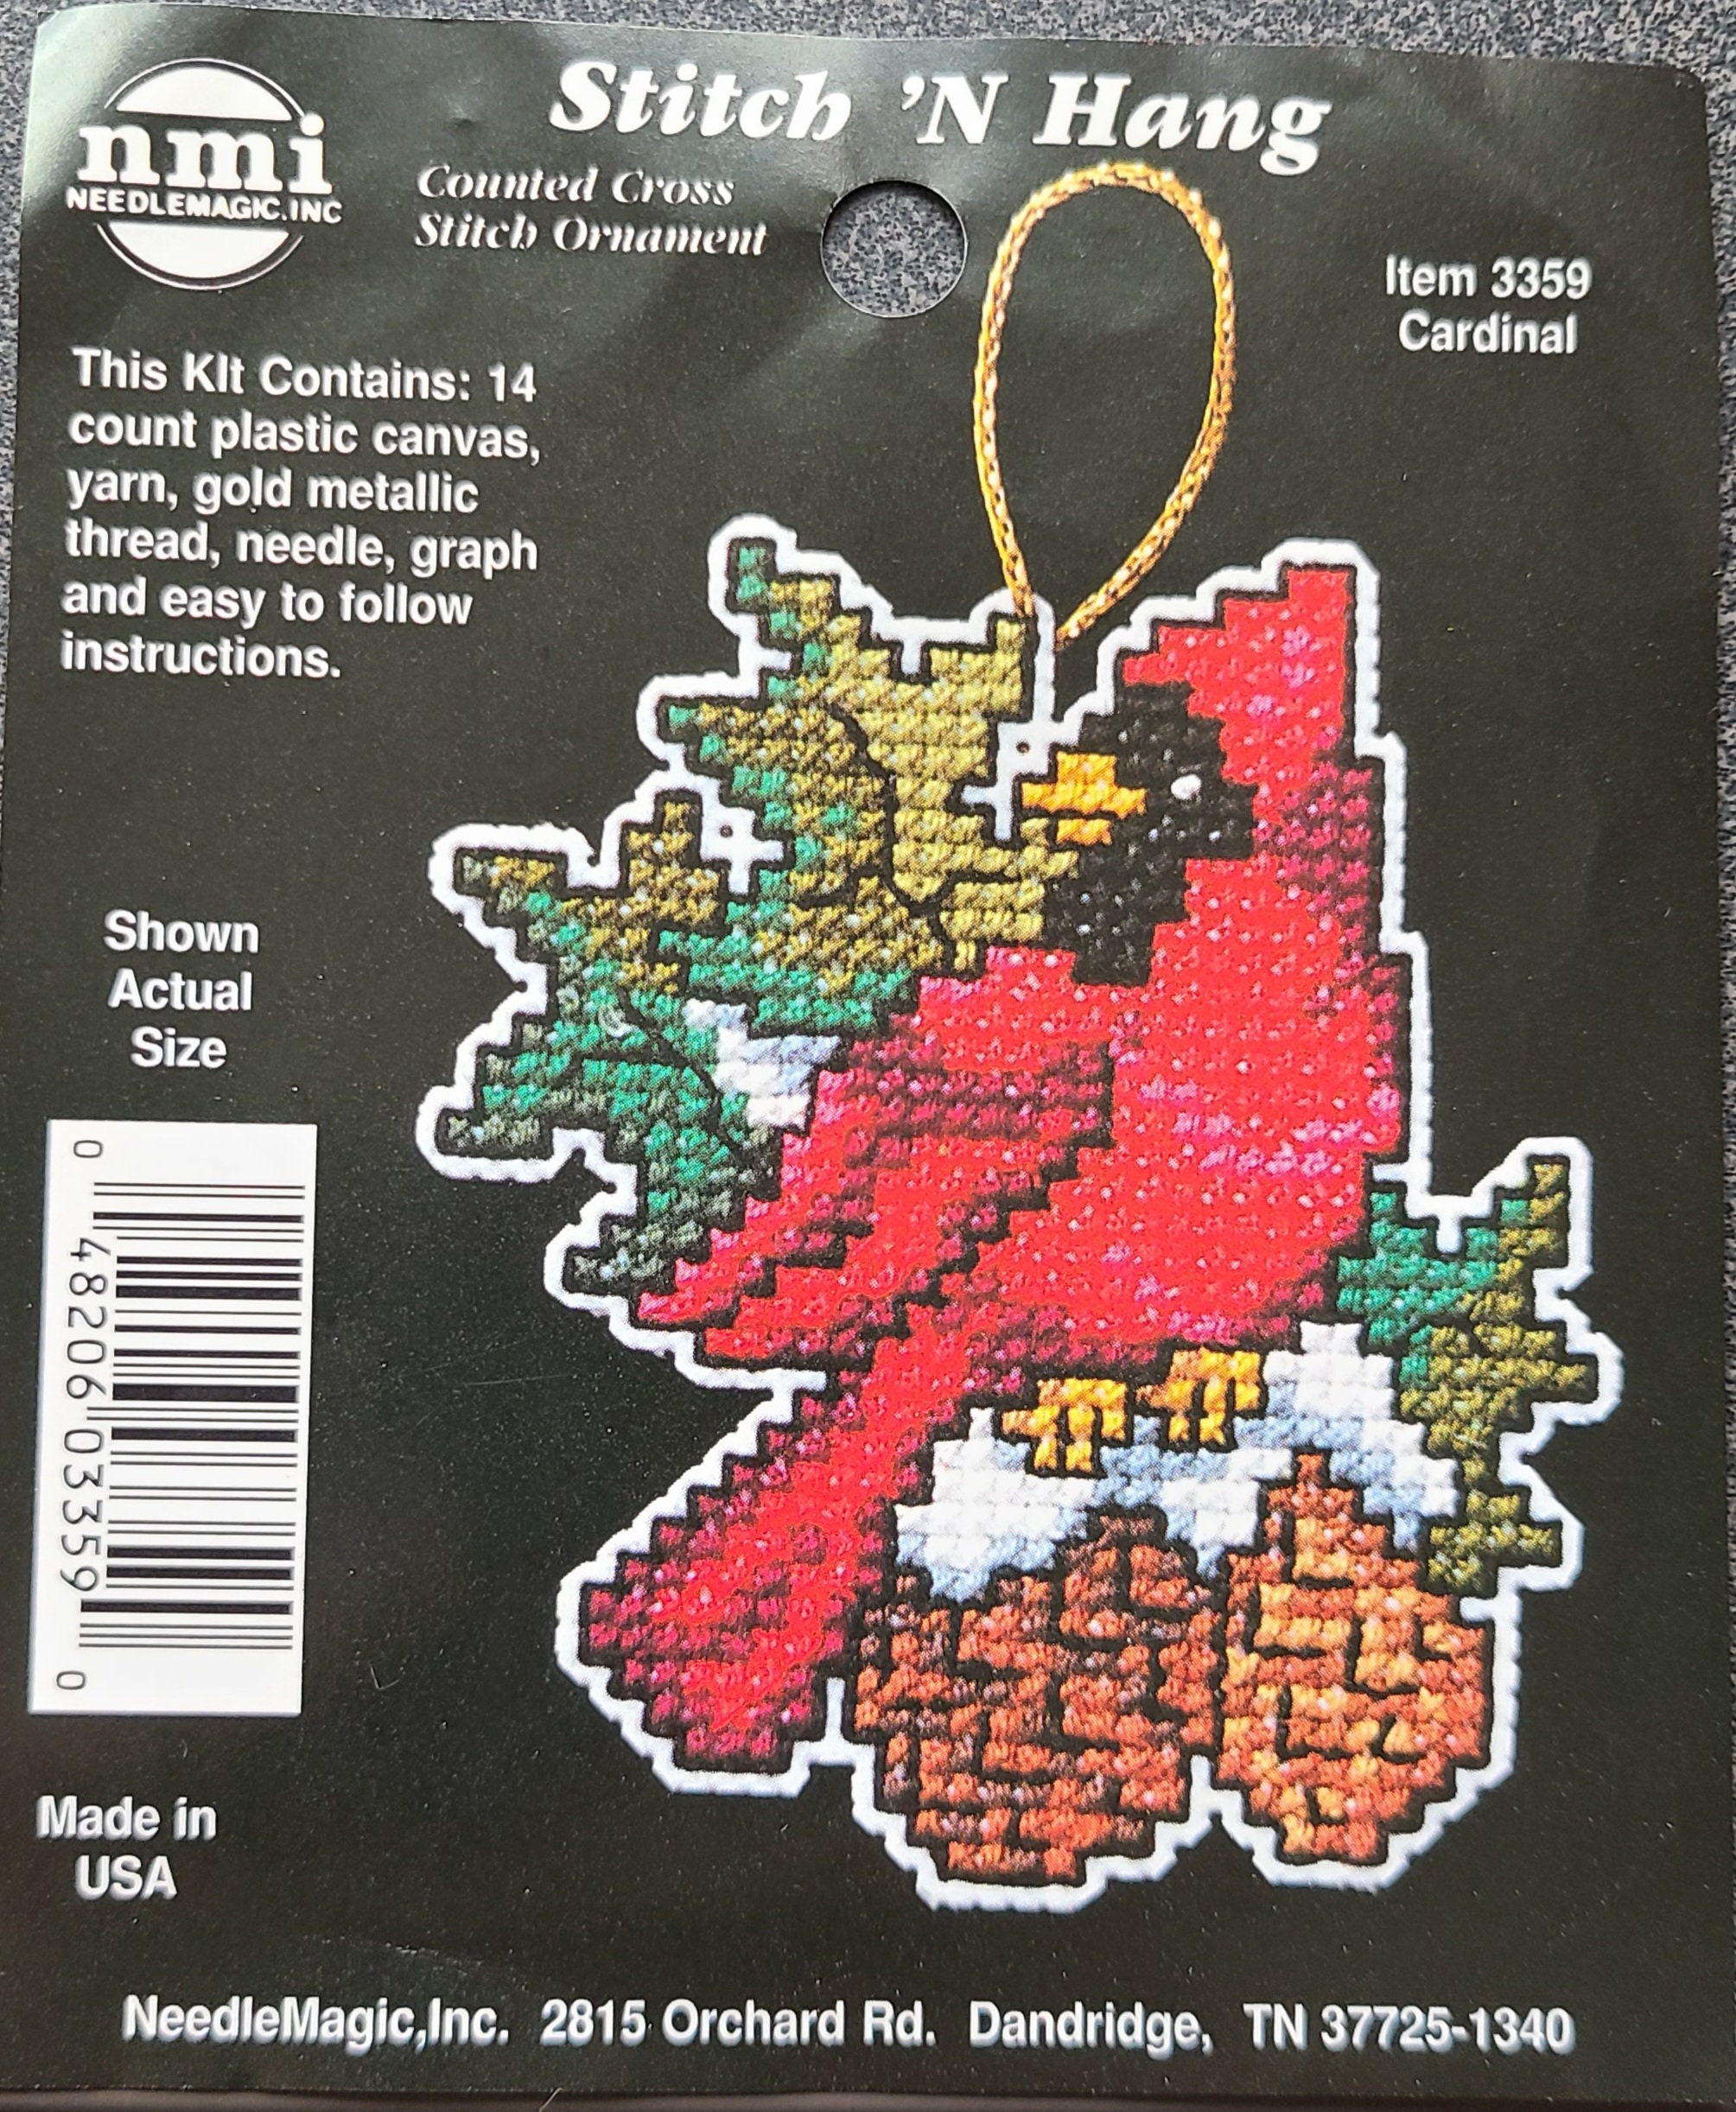 NMI STITCH 'N HANG COUNTED CROSS STITCH ORNAMENT KIT KITTY ITEM